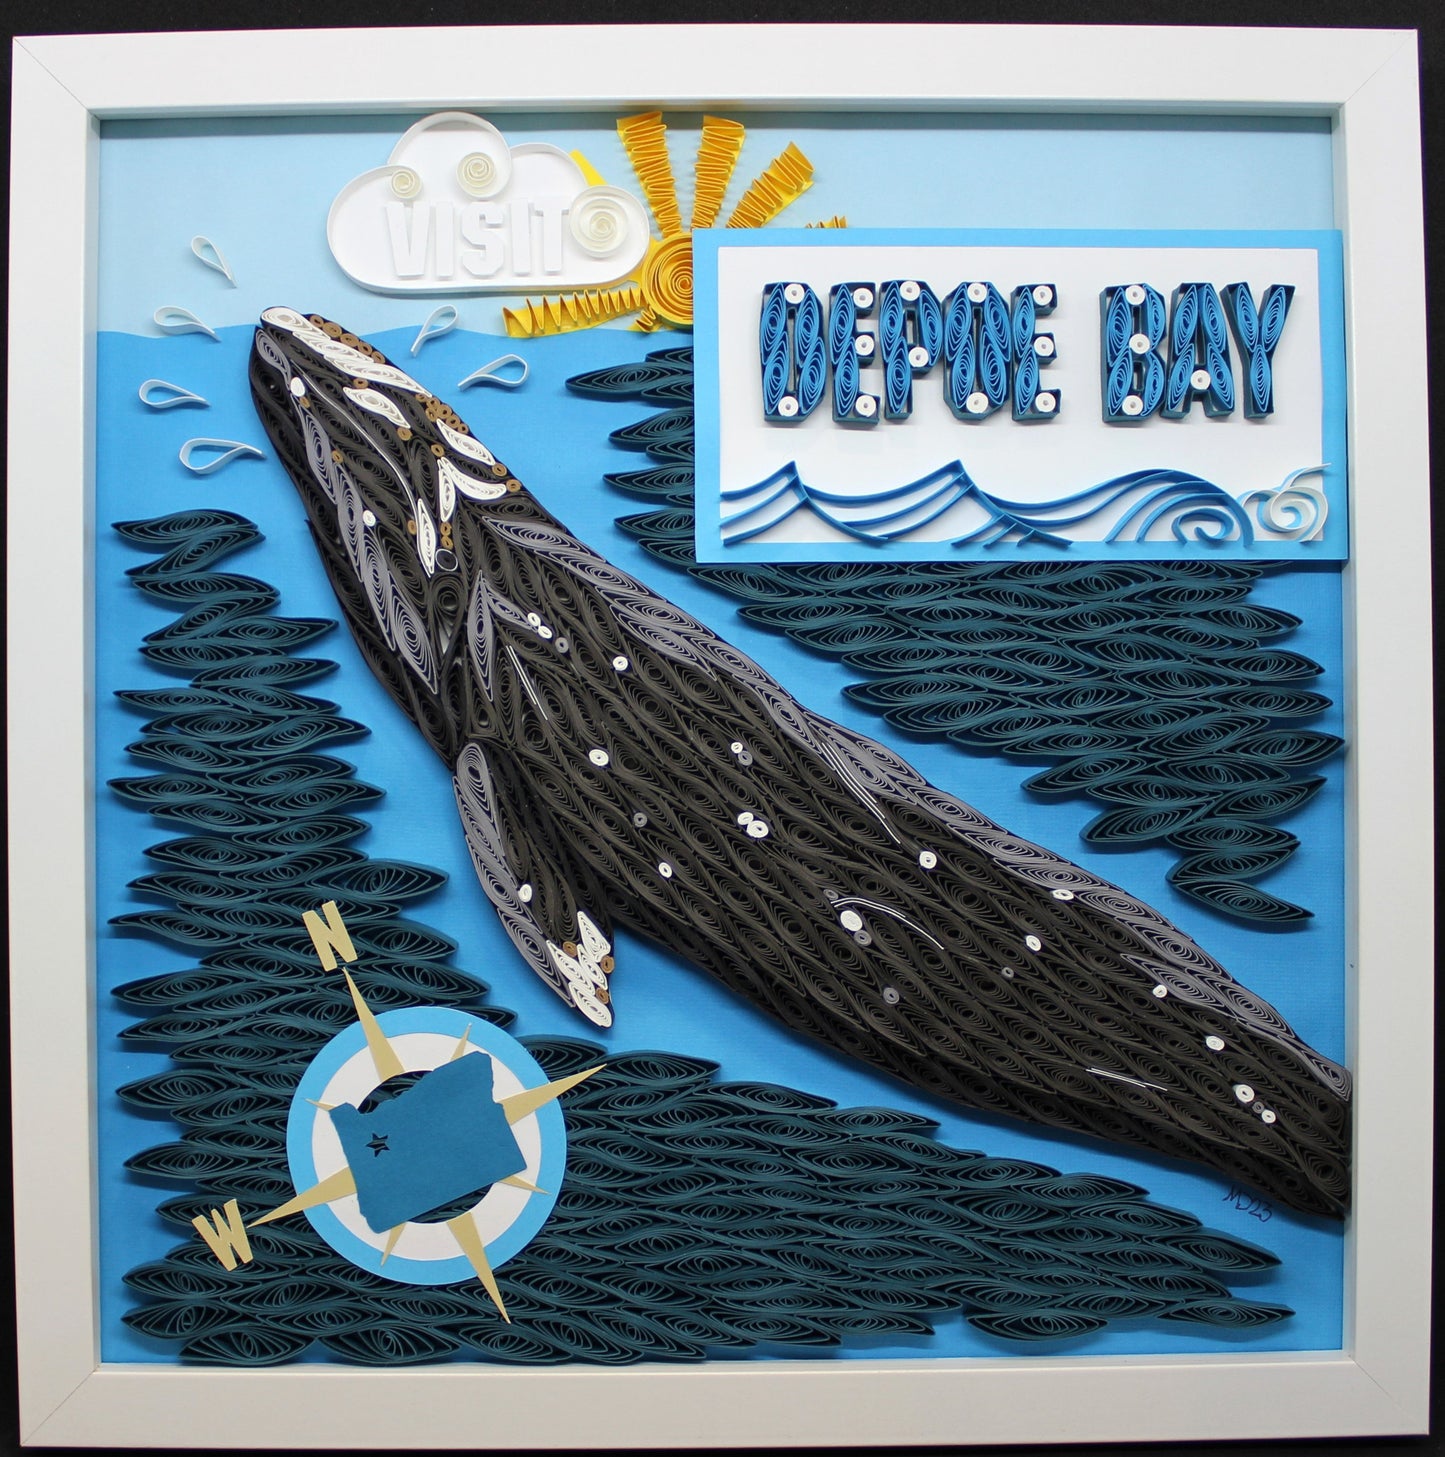 a quilled gray whale features prominently in this travel poster inspired design with words "Visit Depoe Bay" and a paper cut compass rose with Oregon silhouette